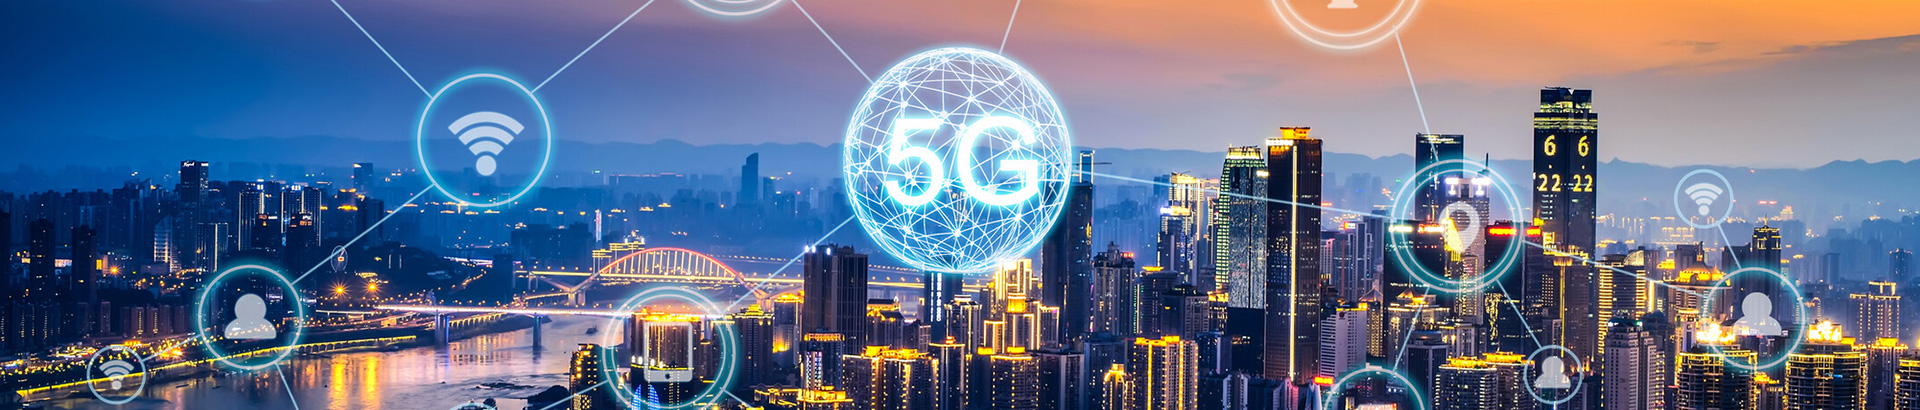 6G Network Will Connect the World Faster